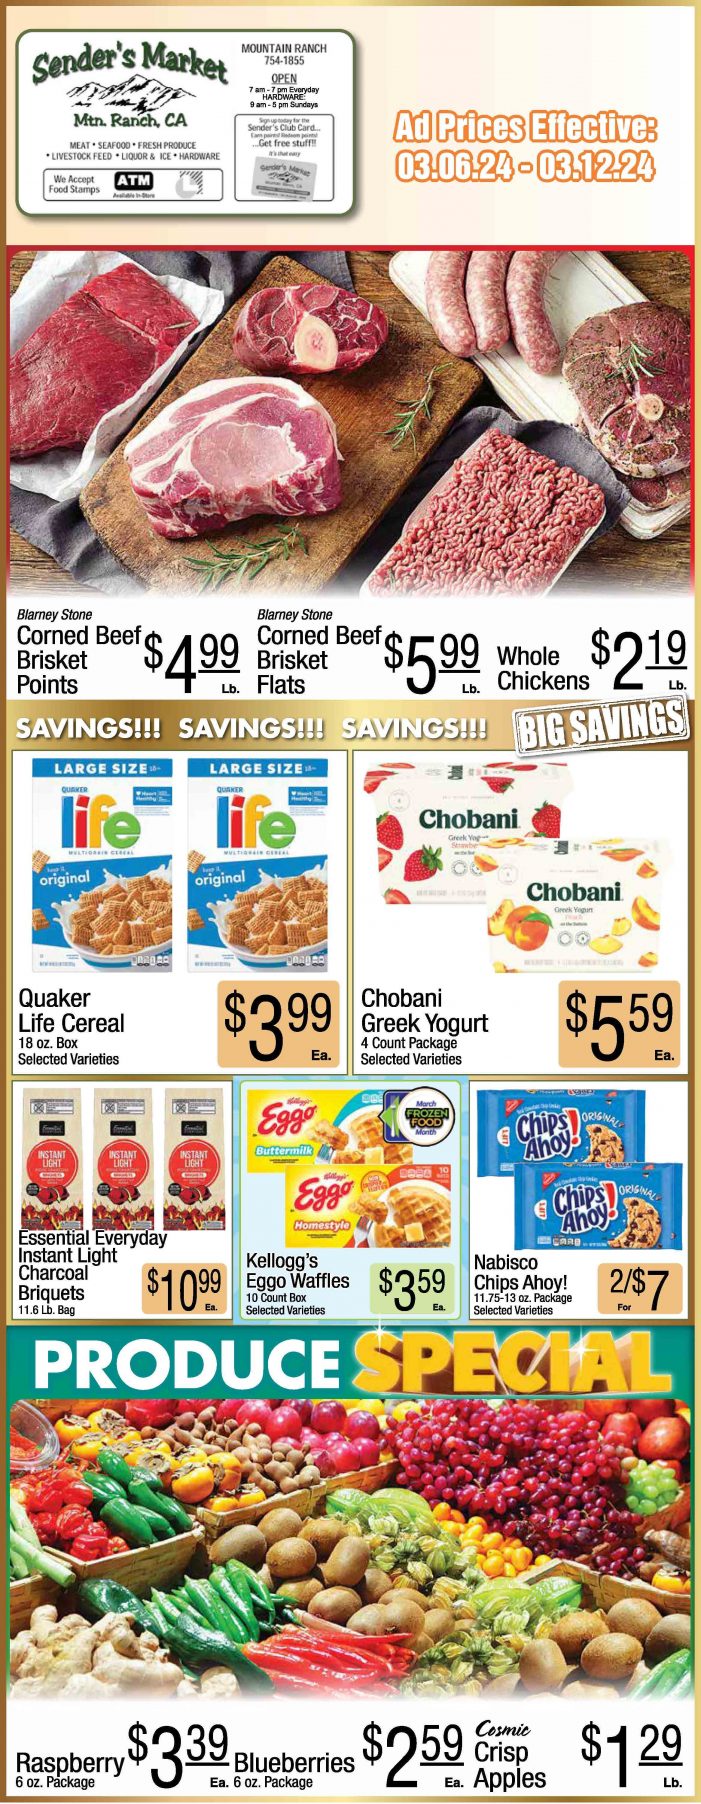 Sender’s Market Weekly Ad & Grocery Specials Through March 12th! Shop Local & Save!!